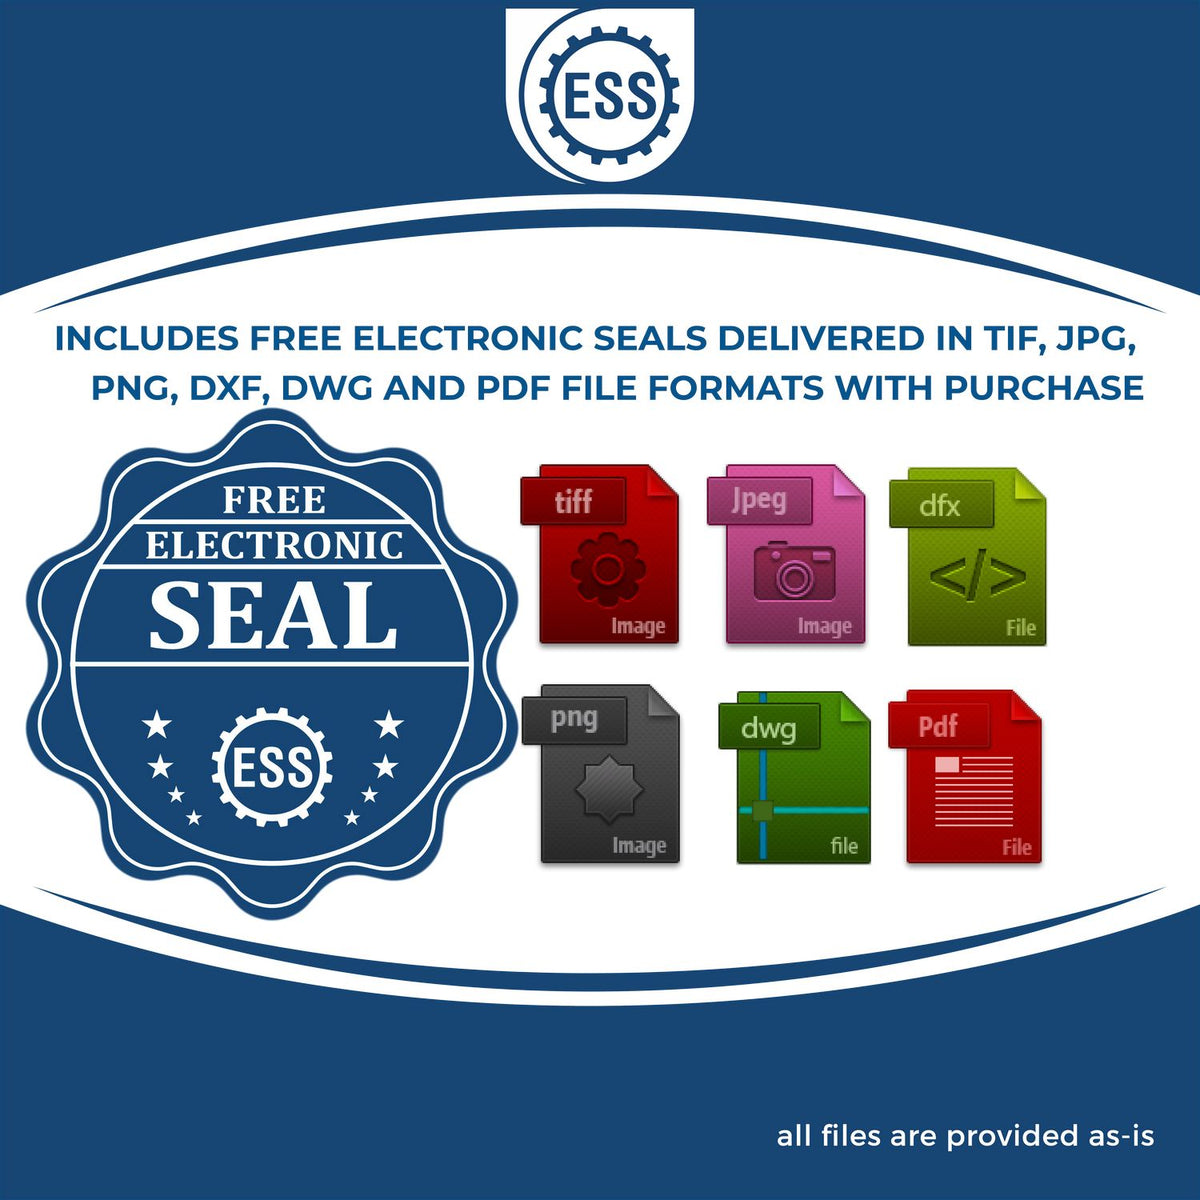 An infographic for the free electronic seal for the Self-Inking Rectangular Oregon Notary Stamp illustrating the different file type icons such as DXF, DWG, TIF, JPG and PNG.